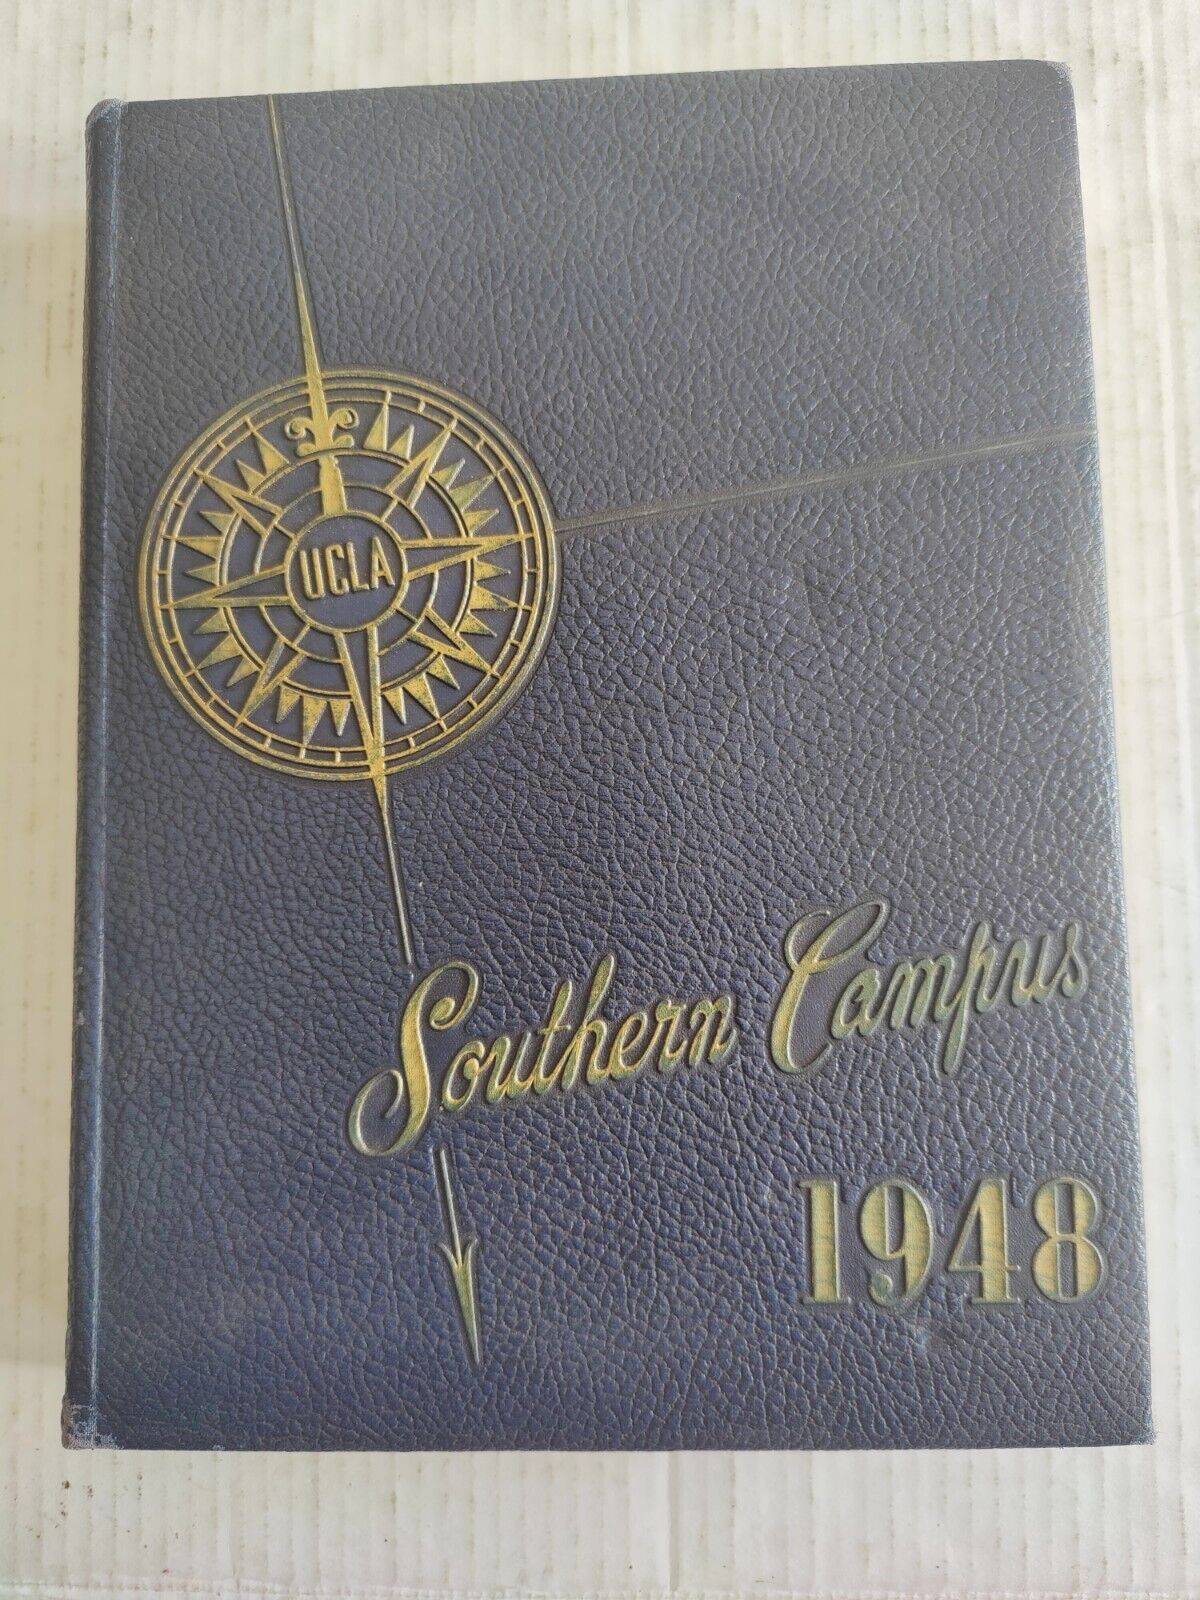 1948 UCLA Southern Campus Hard Cover Yearbook Vintage